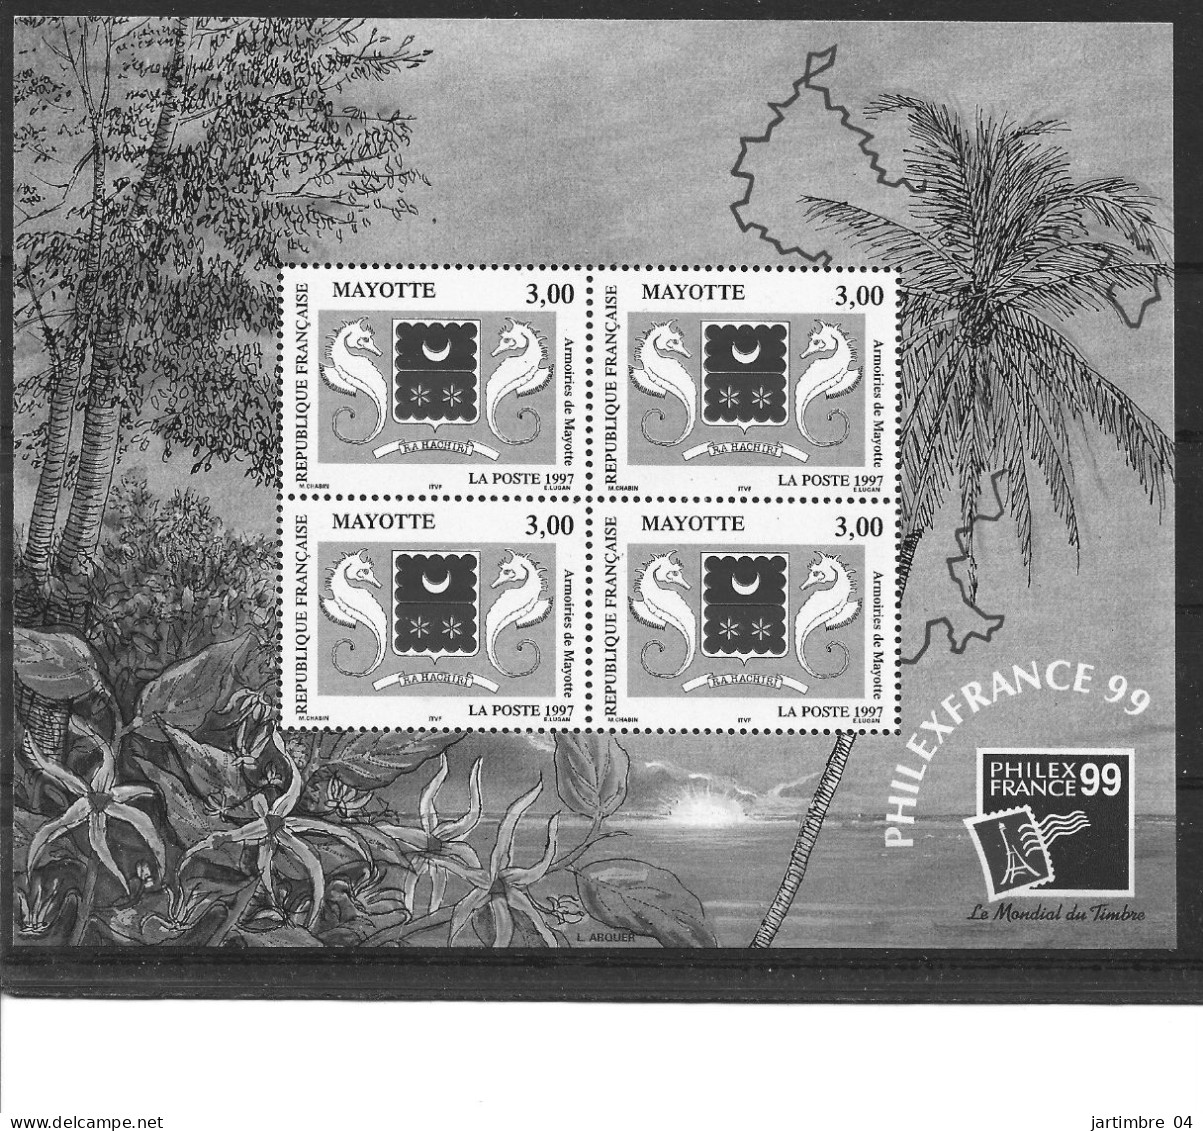 1997 MAYOTTE BF 1**  Armoirie, Philexfrance 99 - Blocs-feuillets